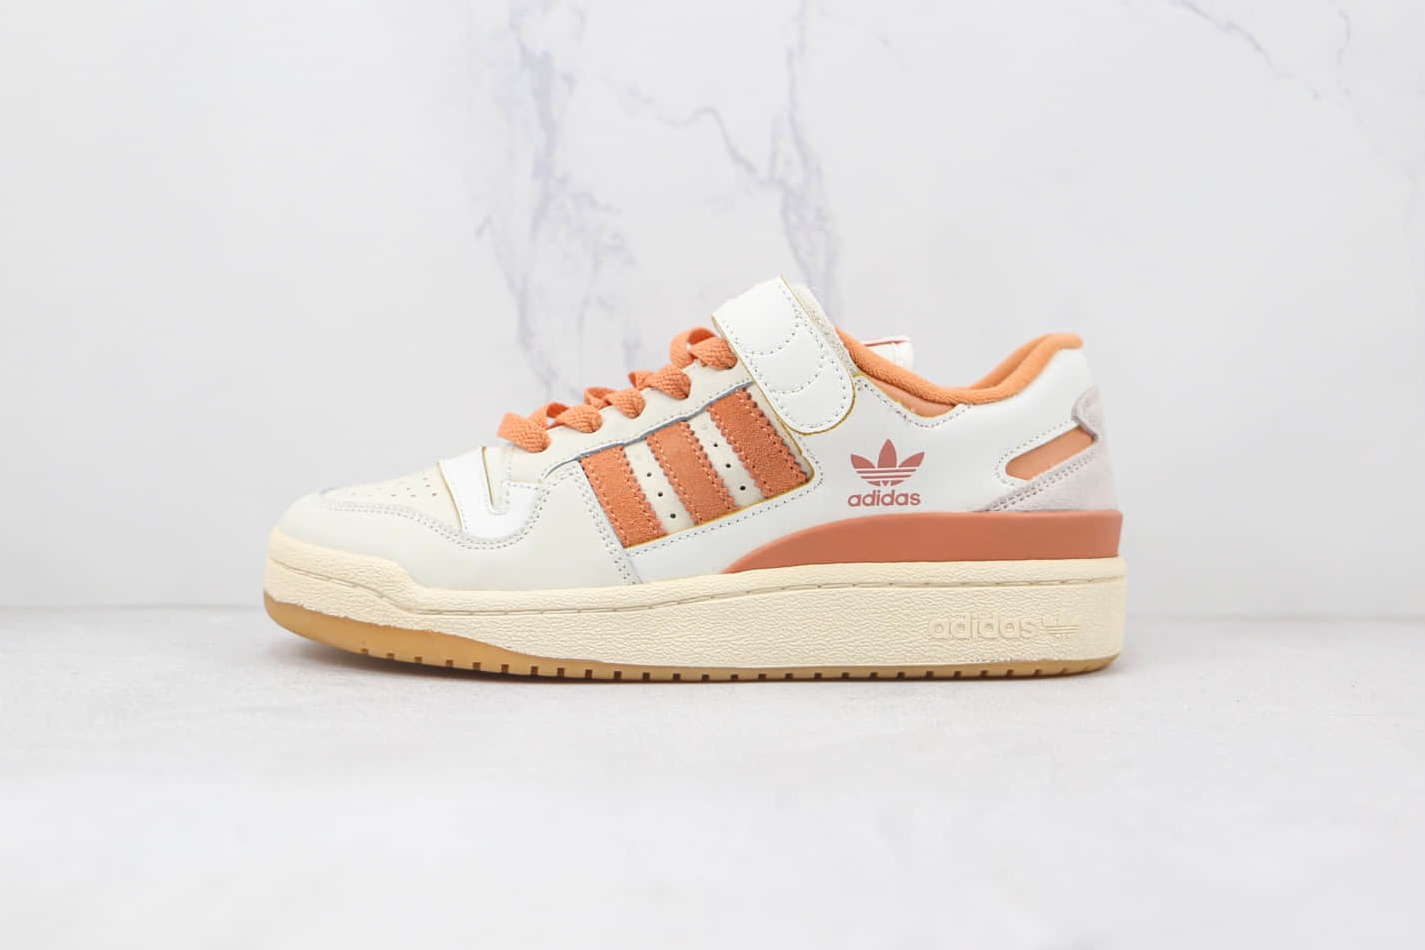 Adidas Forum 84 Low 'White Hazy Copper' G57966 - Classic Style with a Modern Twist